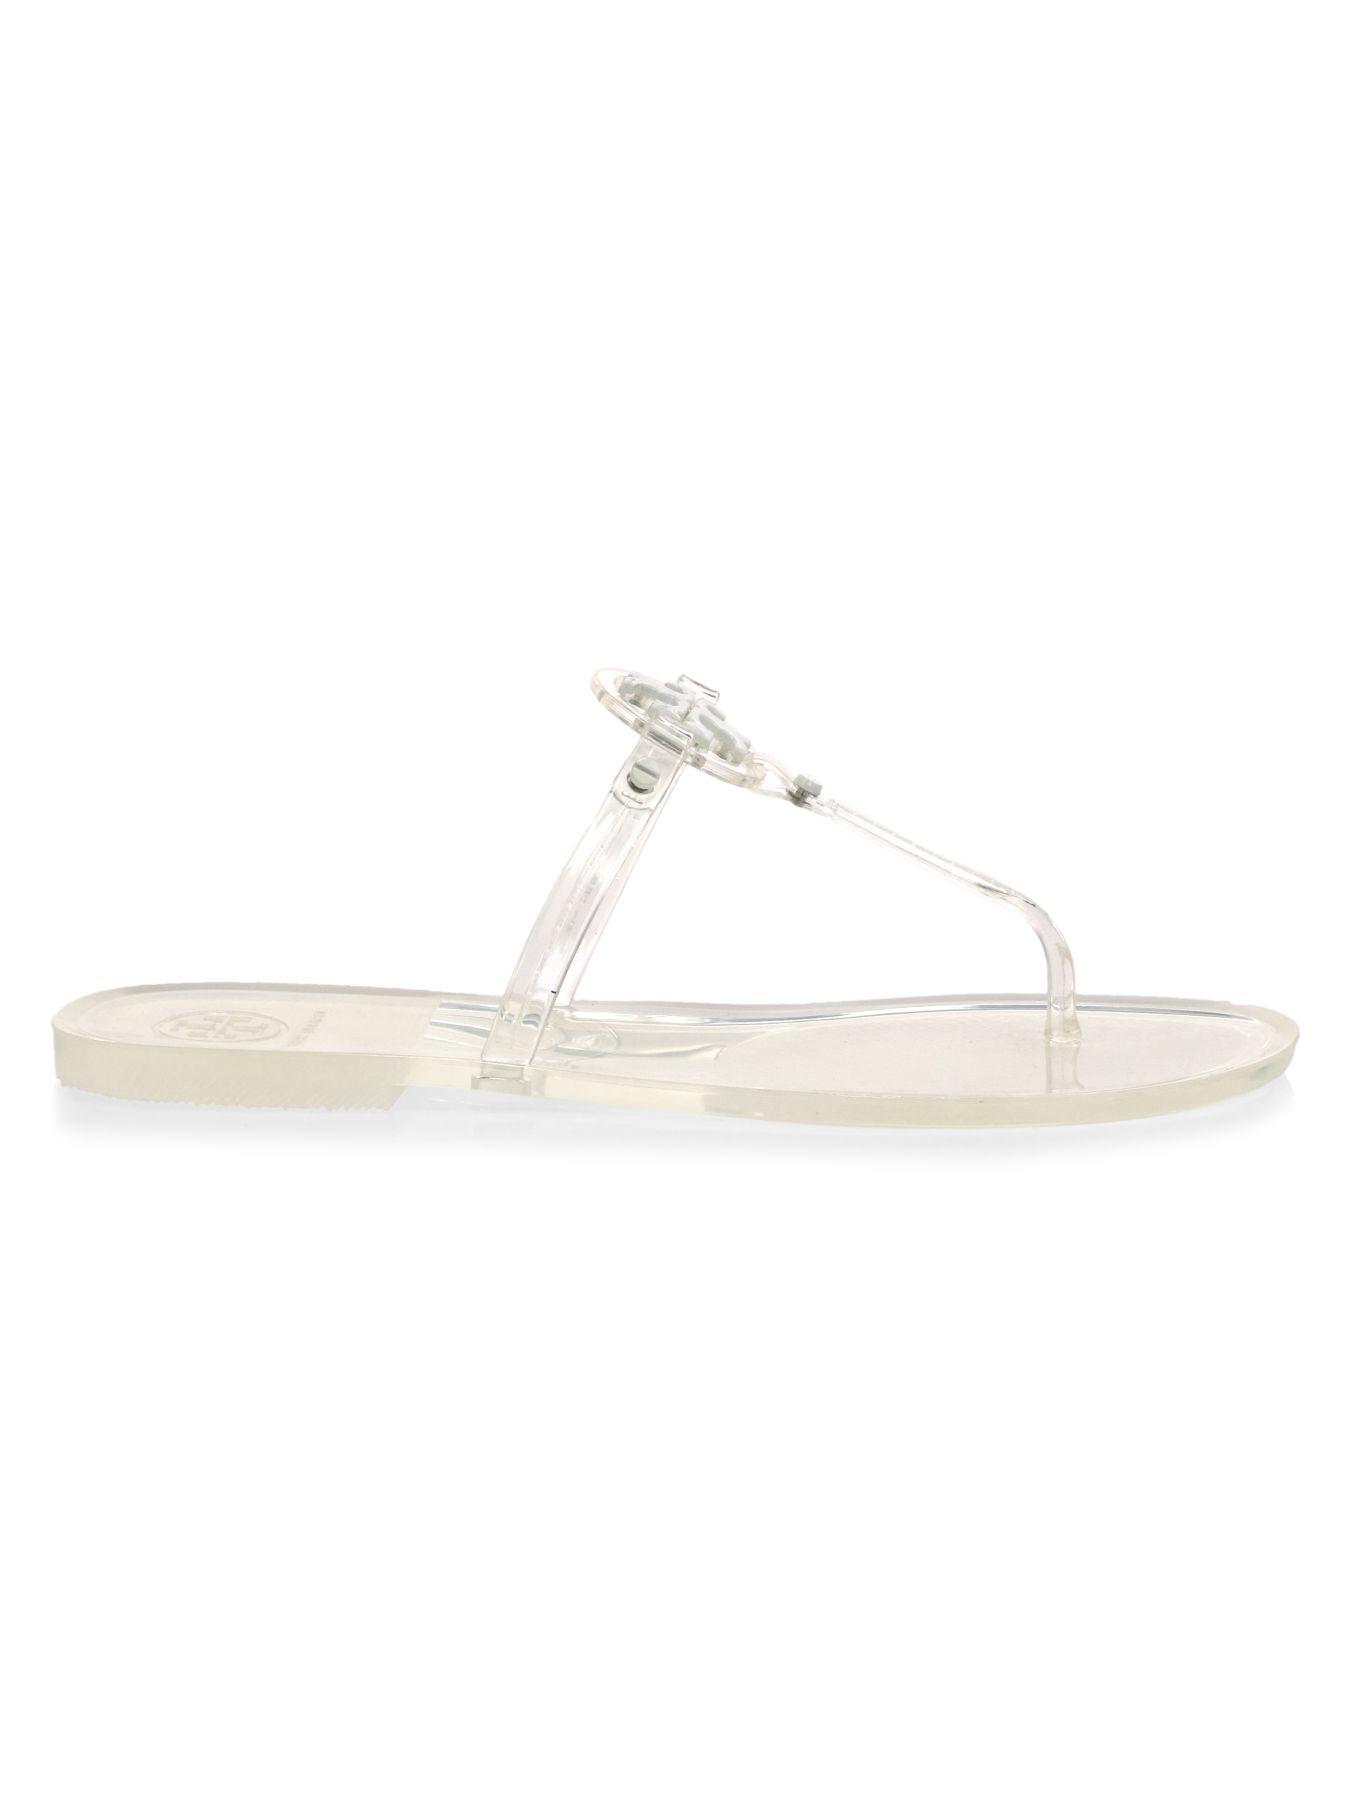 Tory Burch Mini Miller Jelly Thong Sandals in Silver (Metallic) - Lyst